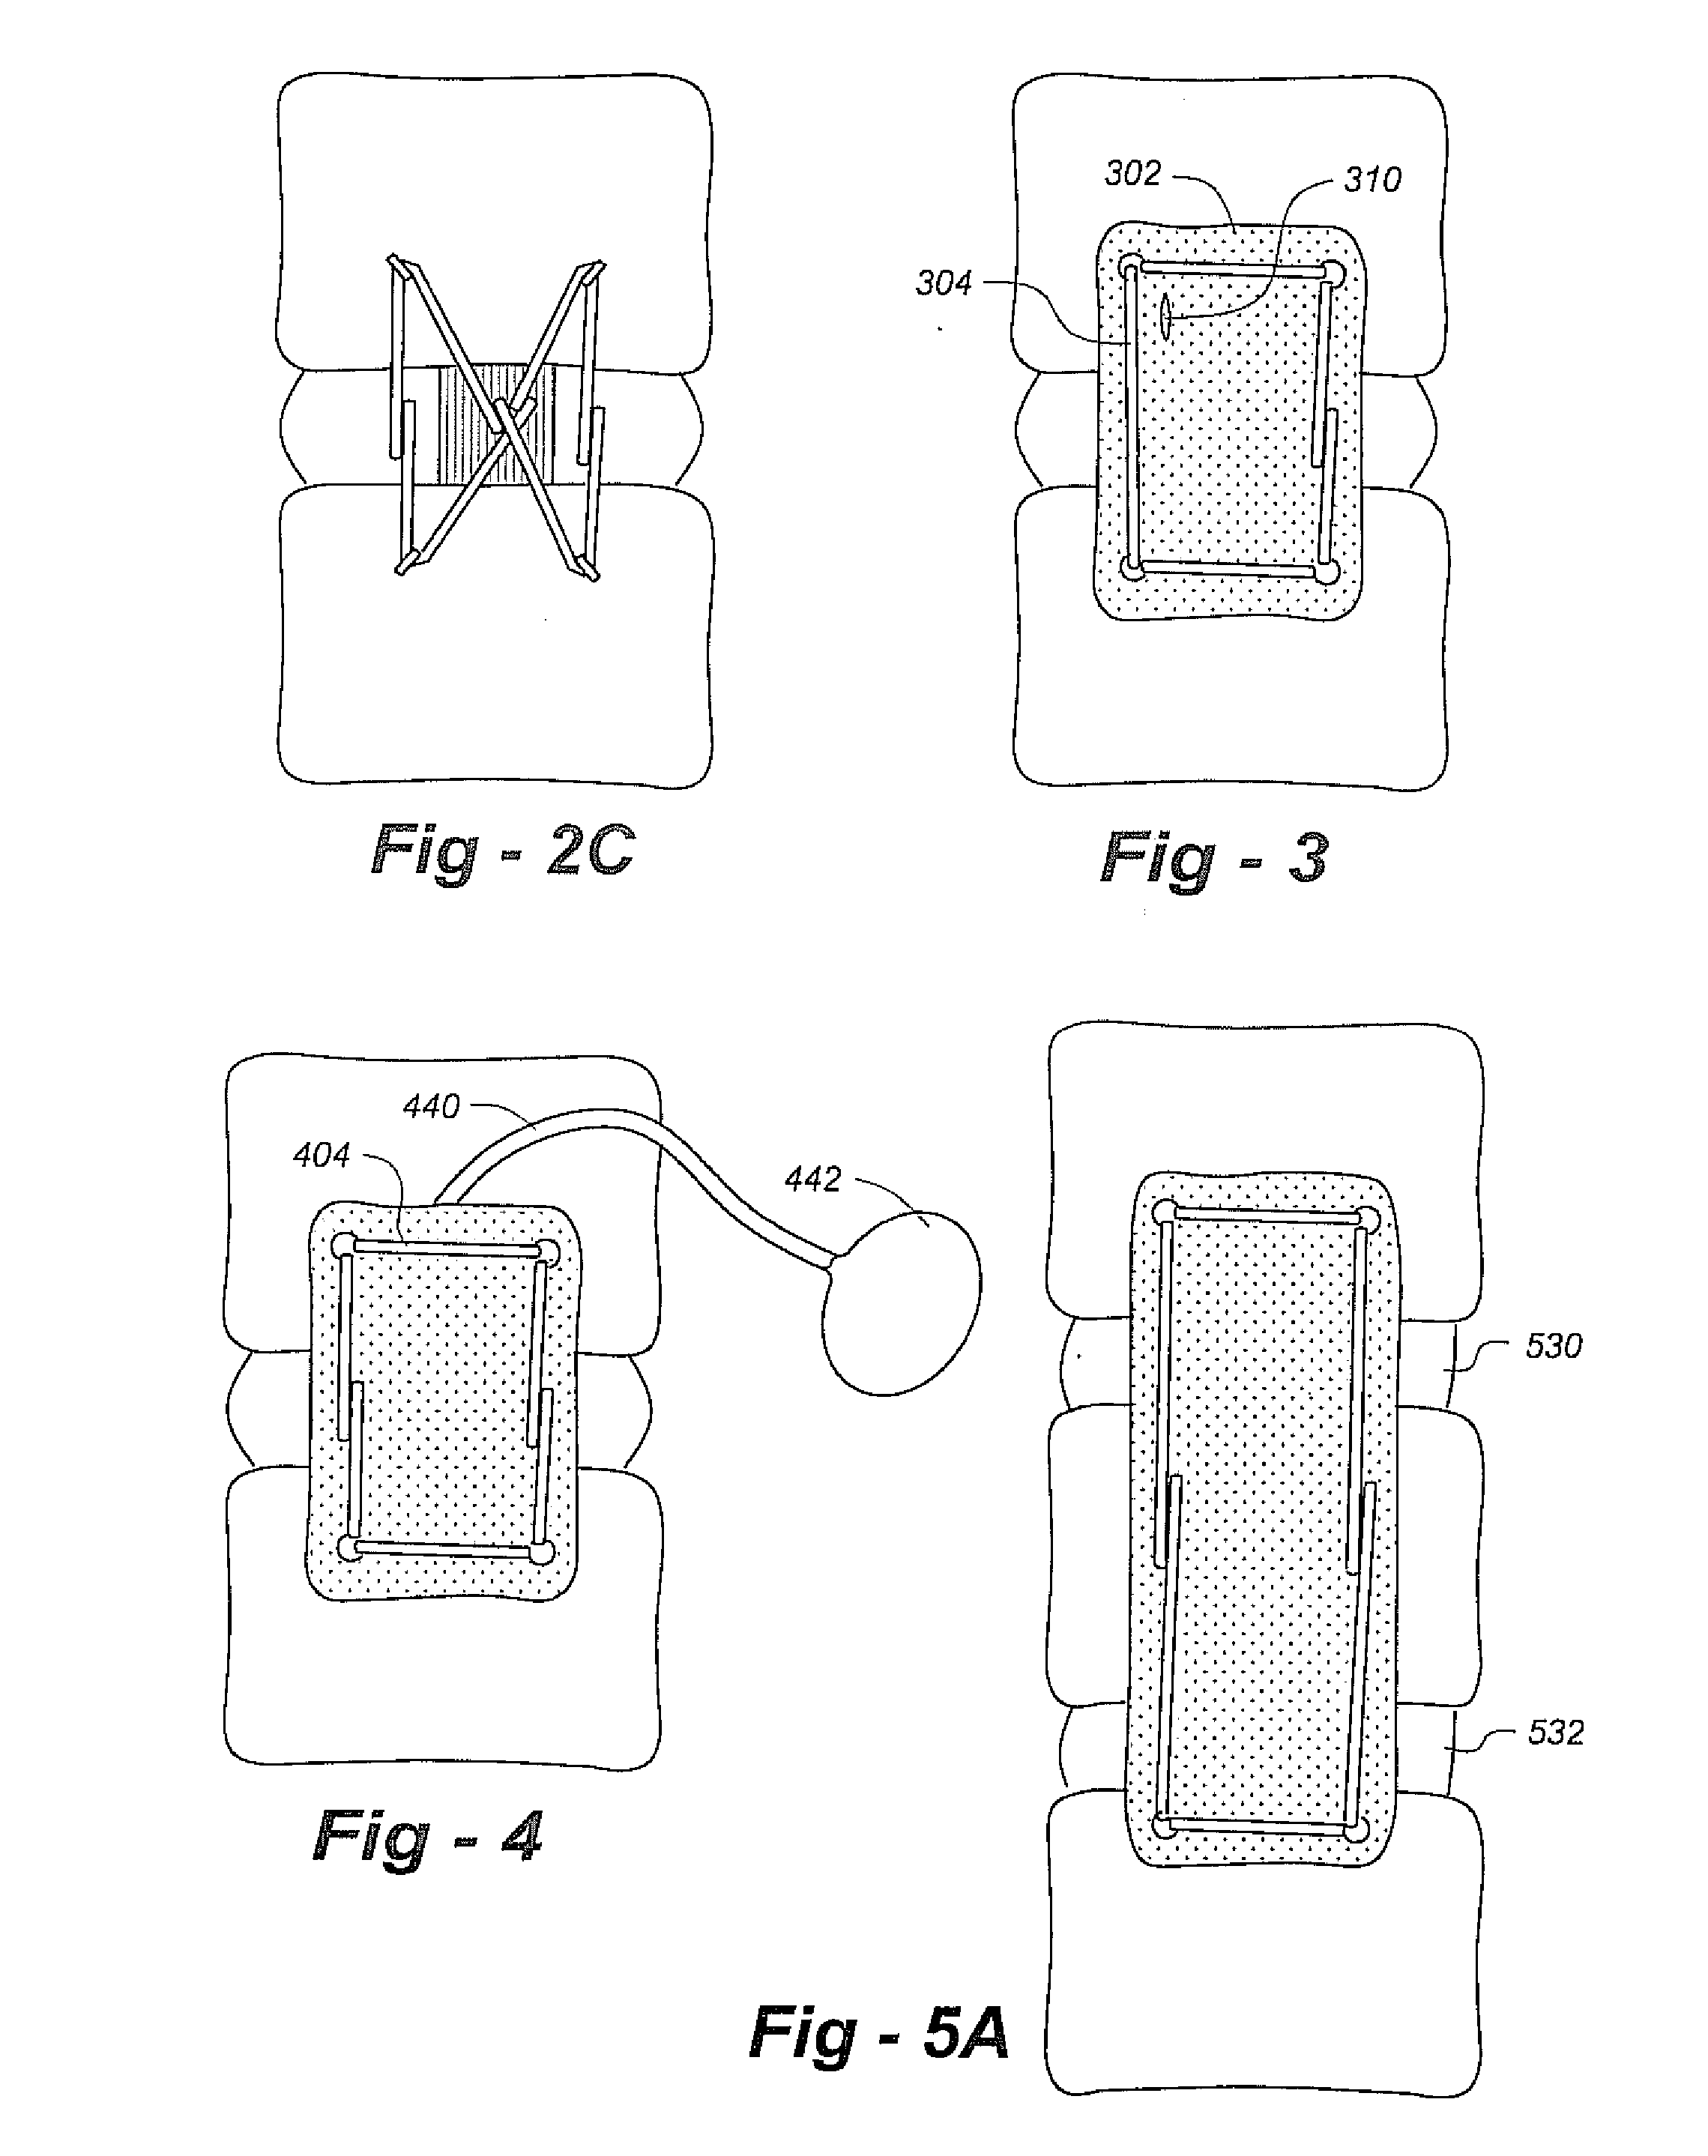 Methods and apparatus for repairing and/or replacing intervertebral disc components and promoting healing